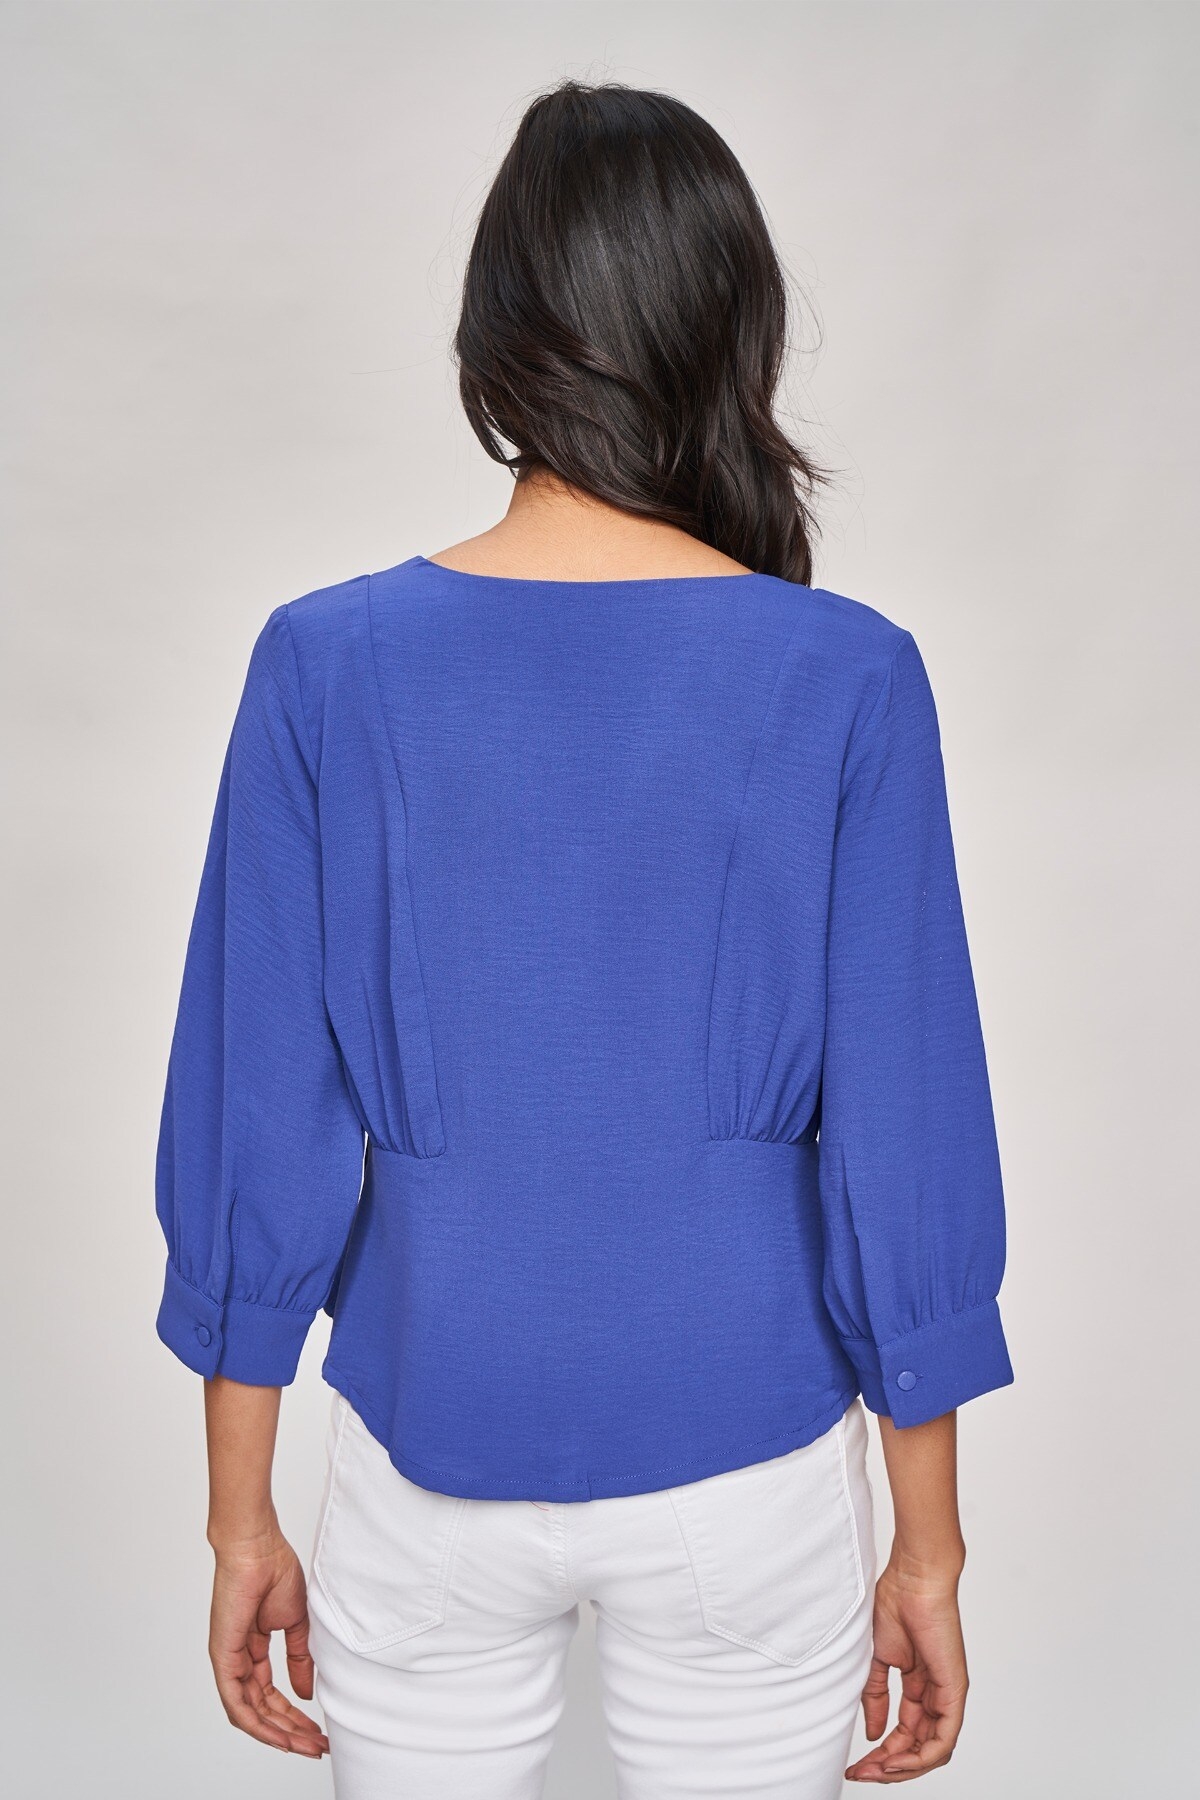 AND | AND BLUE TOP 0